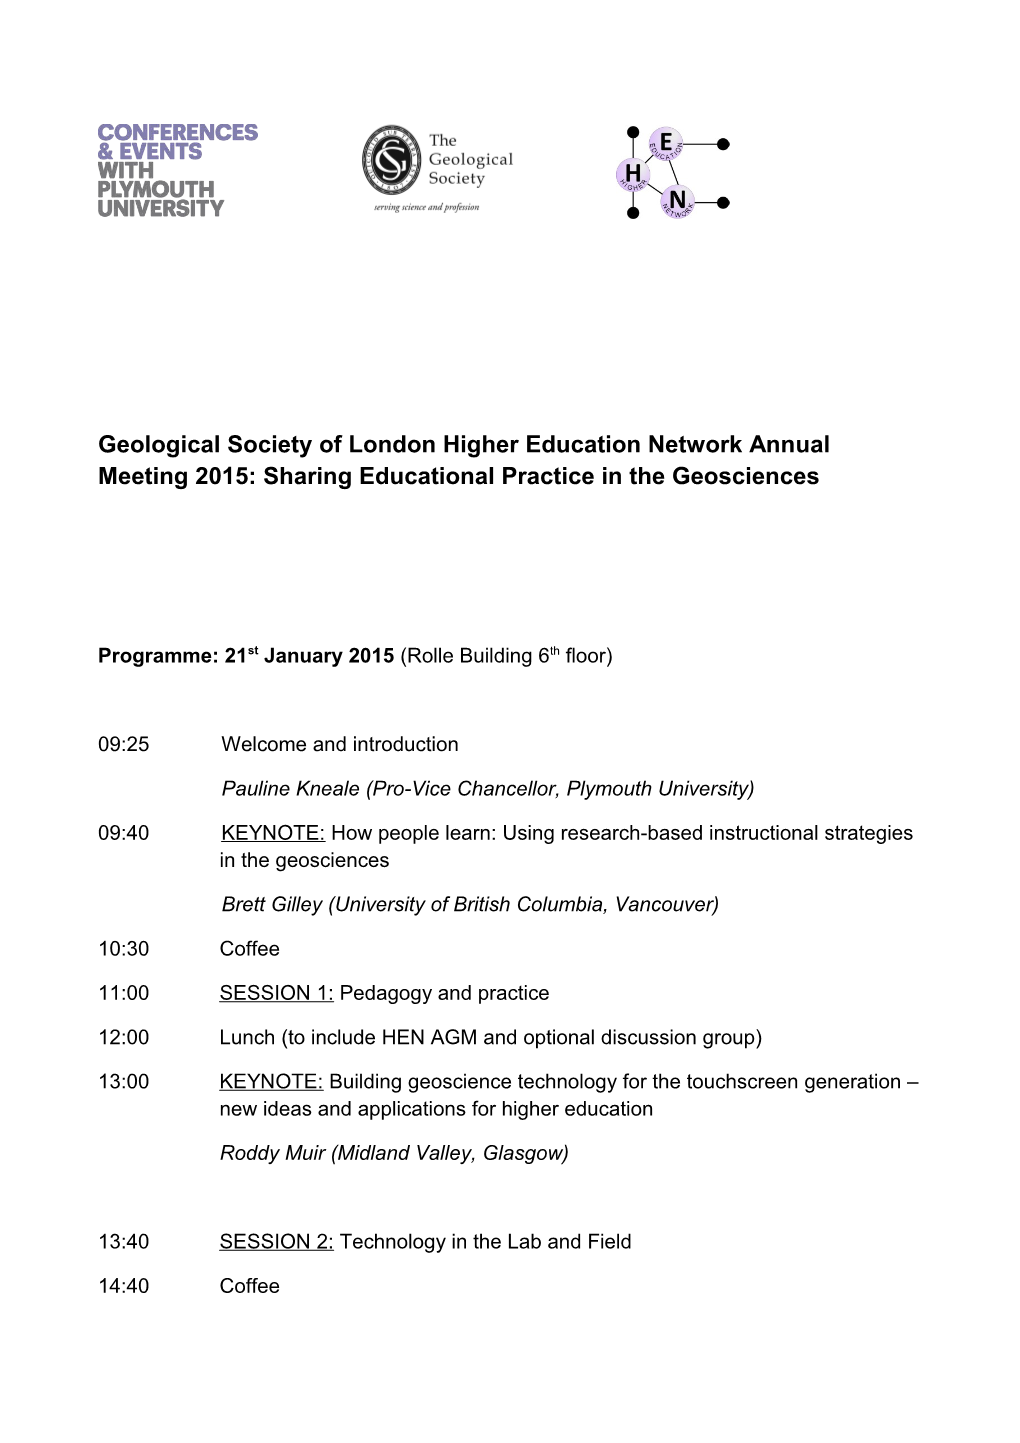 Geological Society of London Higher Education Network Annual Meeting 2015: Sharing Educational